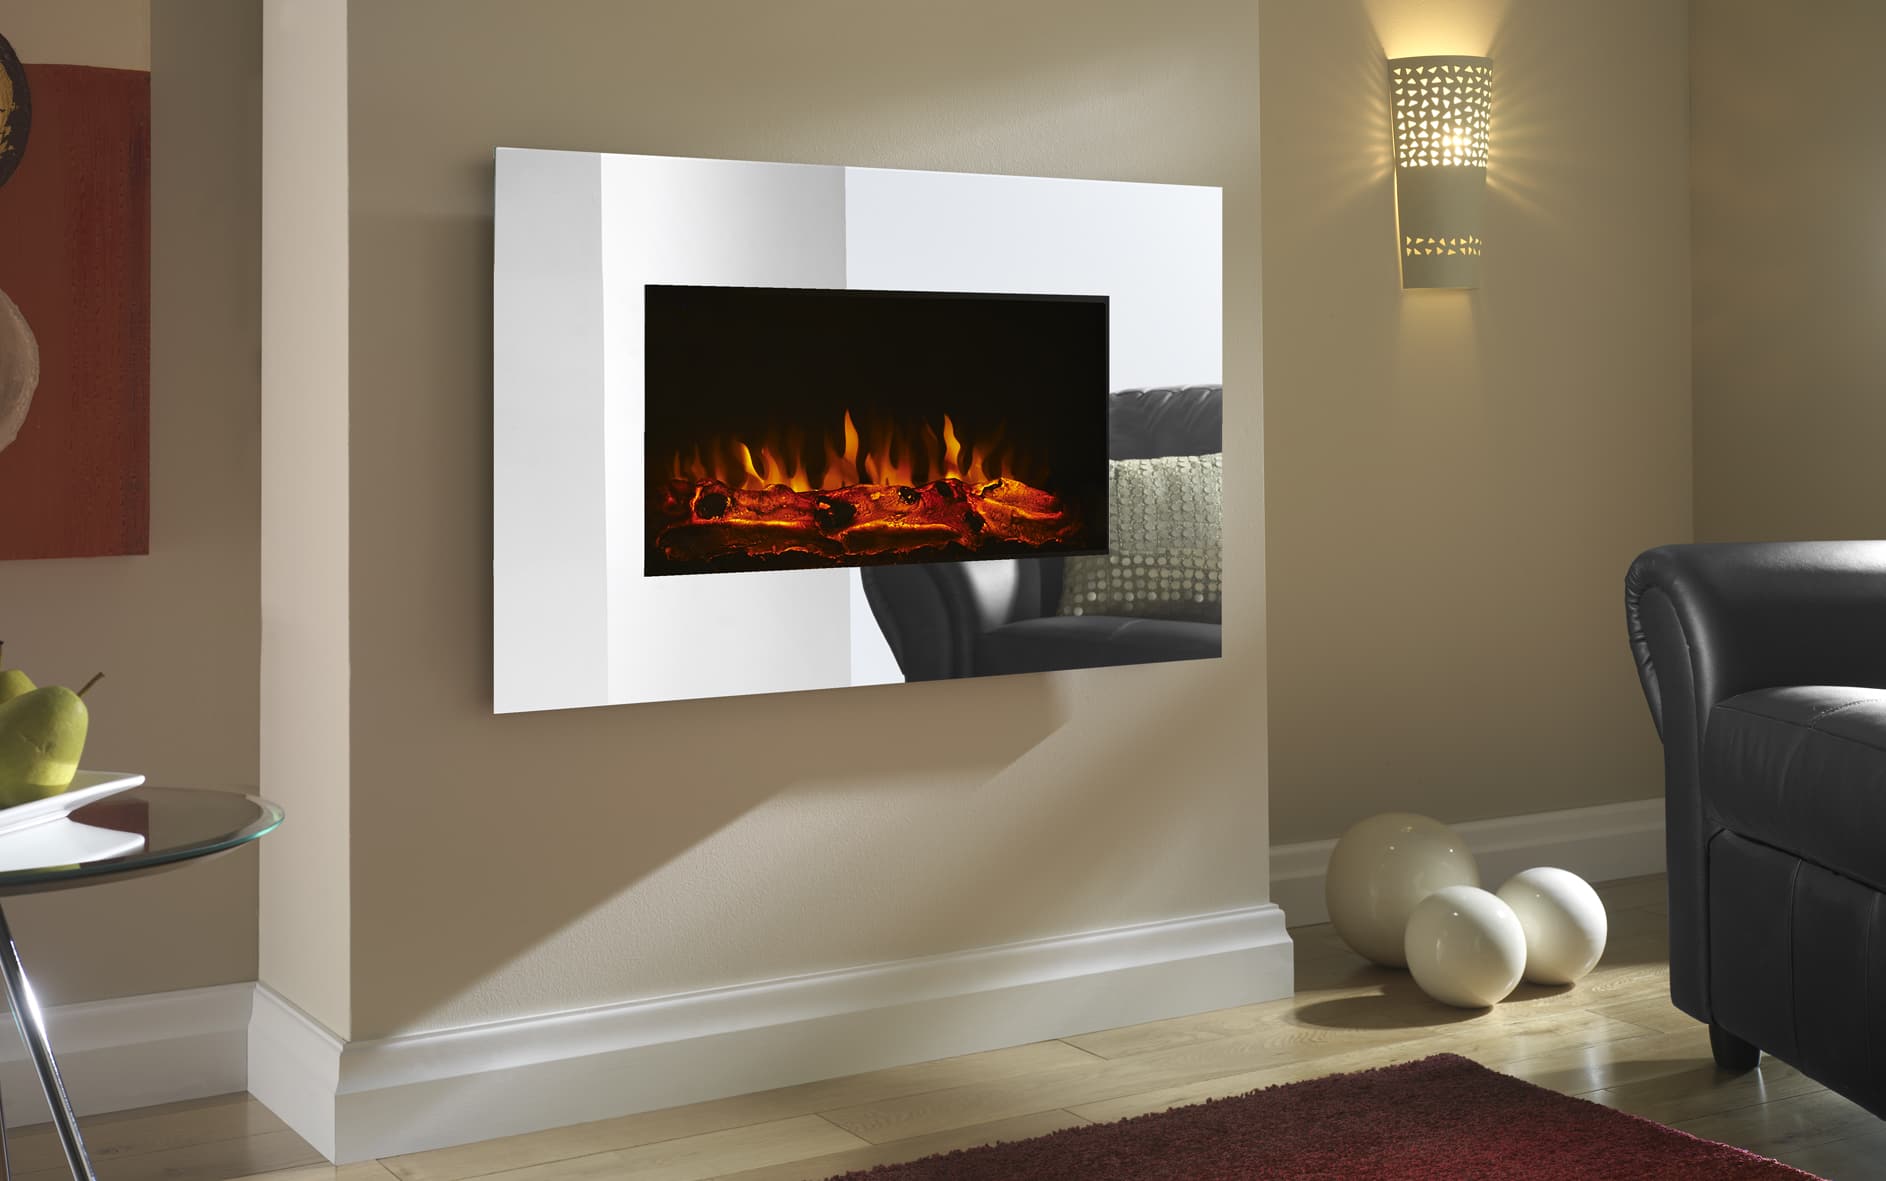 Eko Fires 1110 Mirrored - LED Wall Mounted Electric Fire